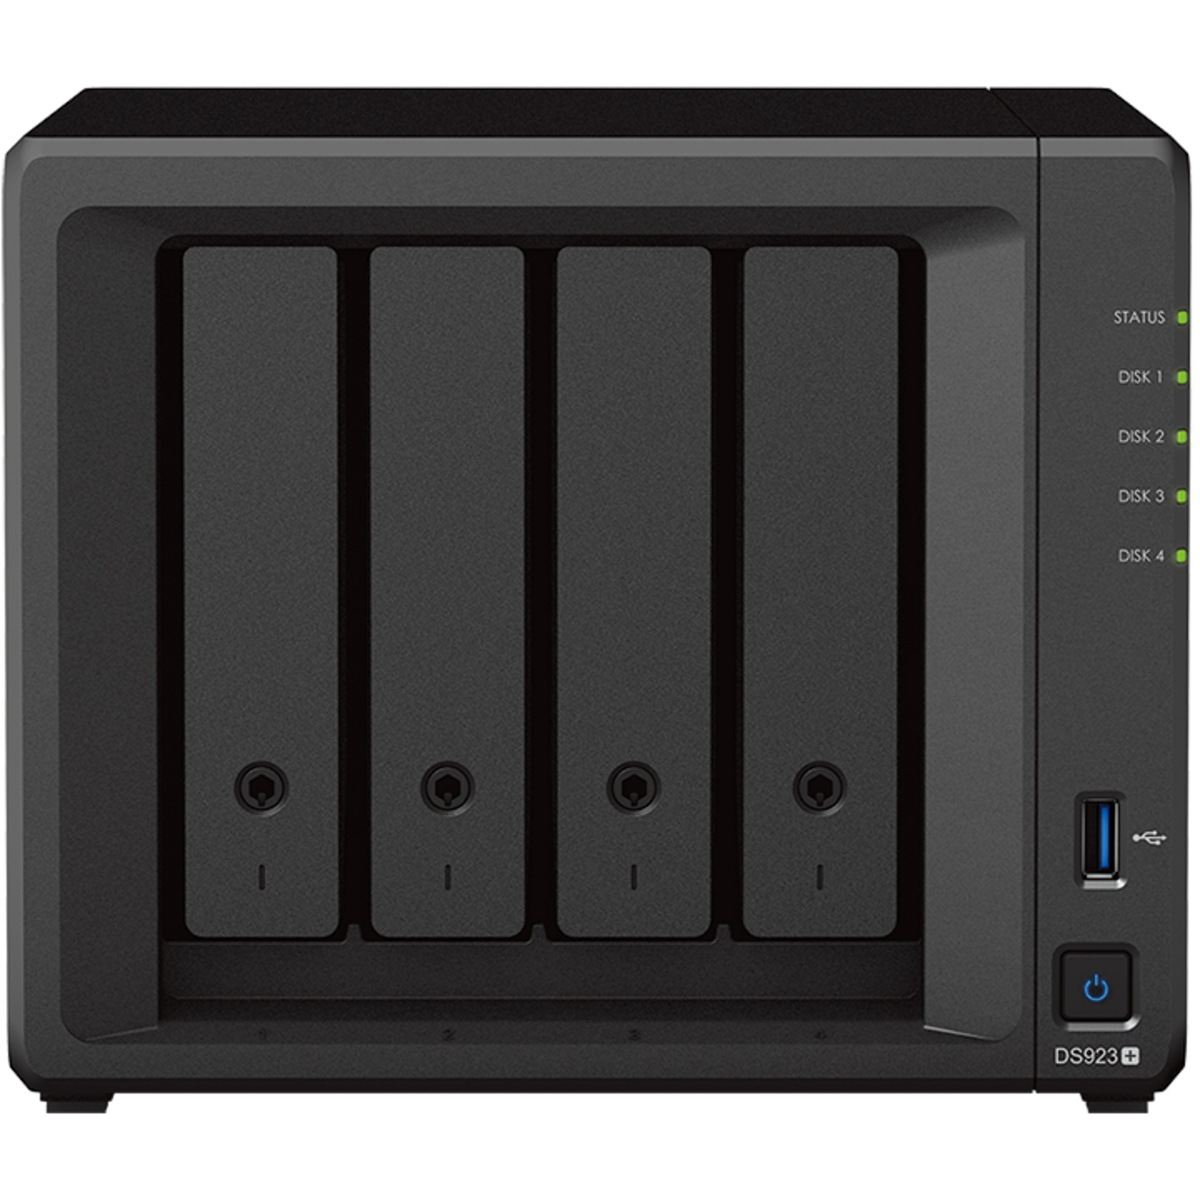 Synology DiskStation DS923+ 64tb 4-Bay Desktop Multimedia / Power User / Business NAS - Network Attached Storage Device 4x16tb Seagate IronWolf Pro ST16000NT001 3.5 7200rpm SATA 6Gb/s HDD NAS Class Drives Installed - Burn-In Tested - ON SALE - FREE RAM UPGRADE DiskStation DS923+